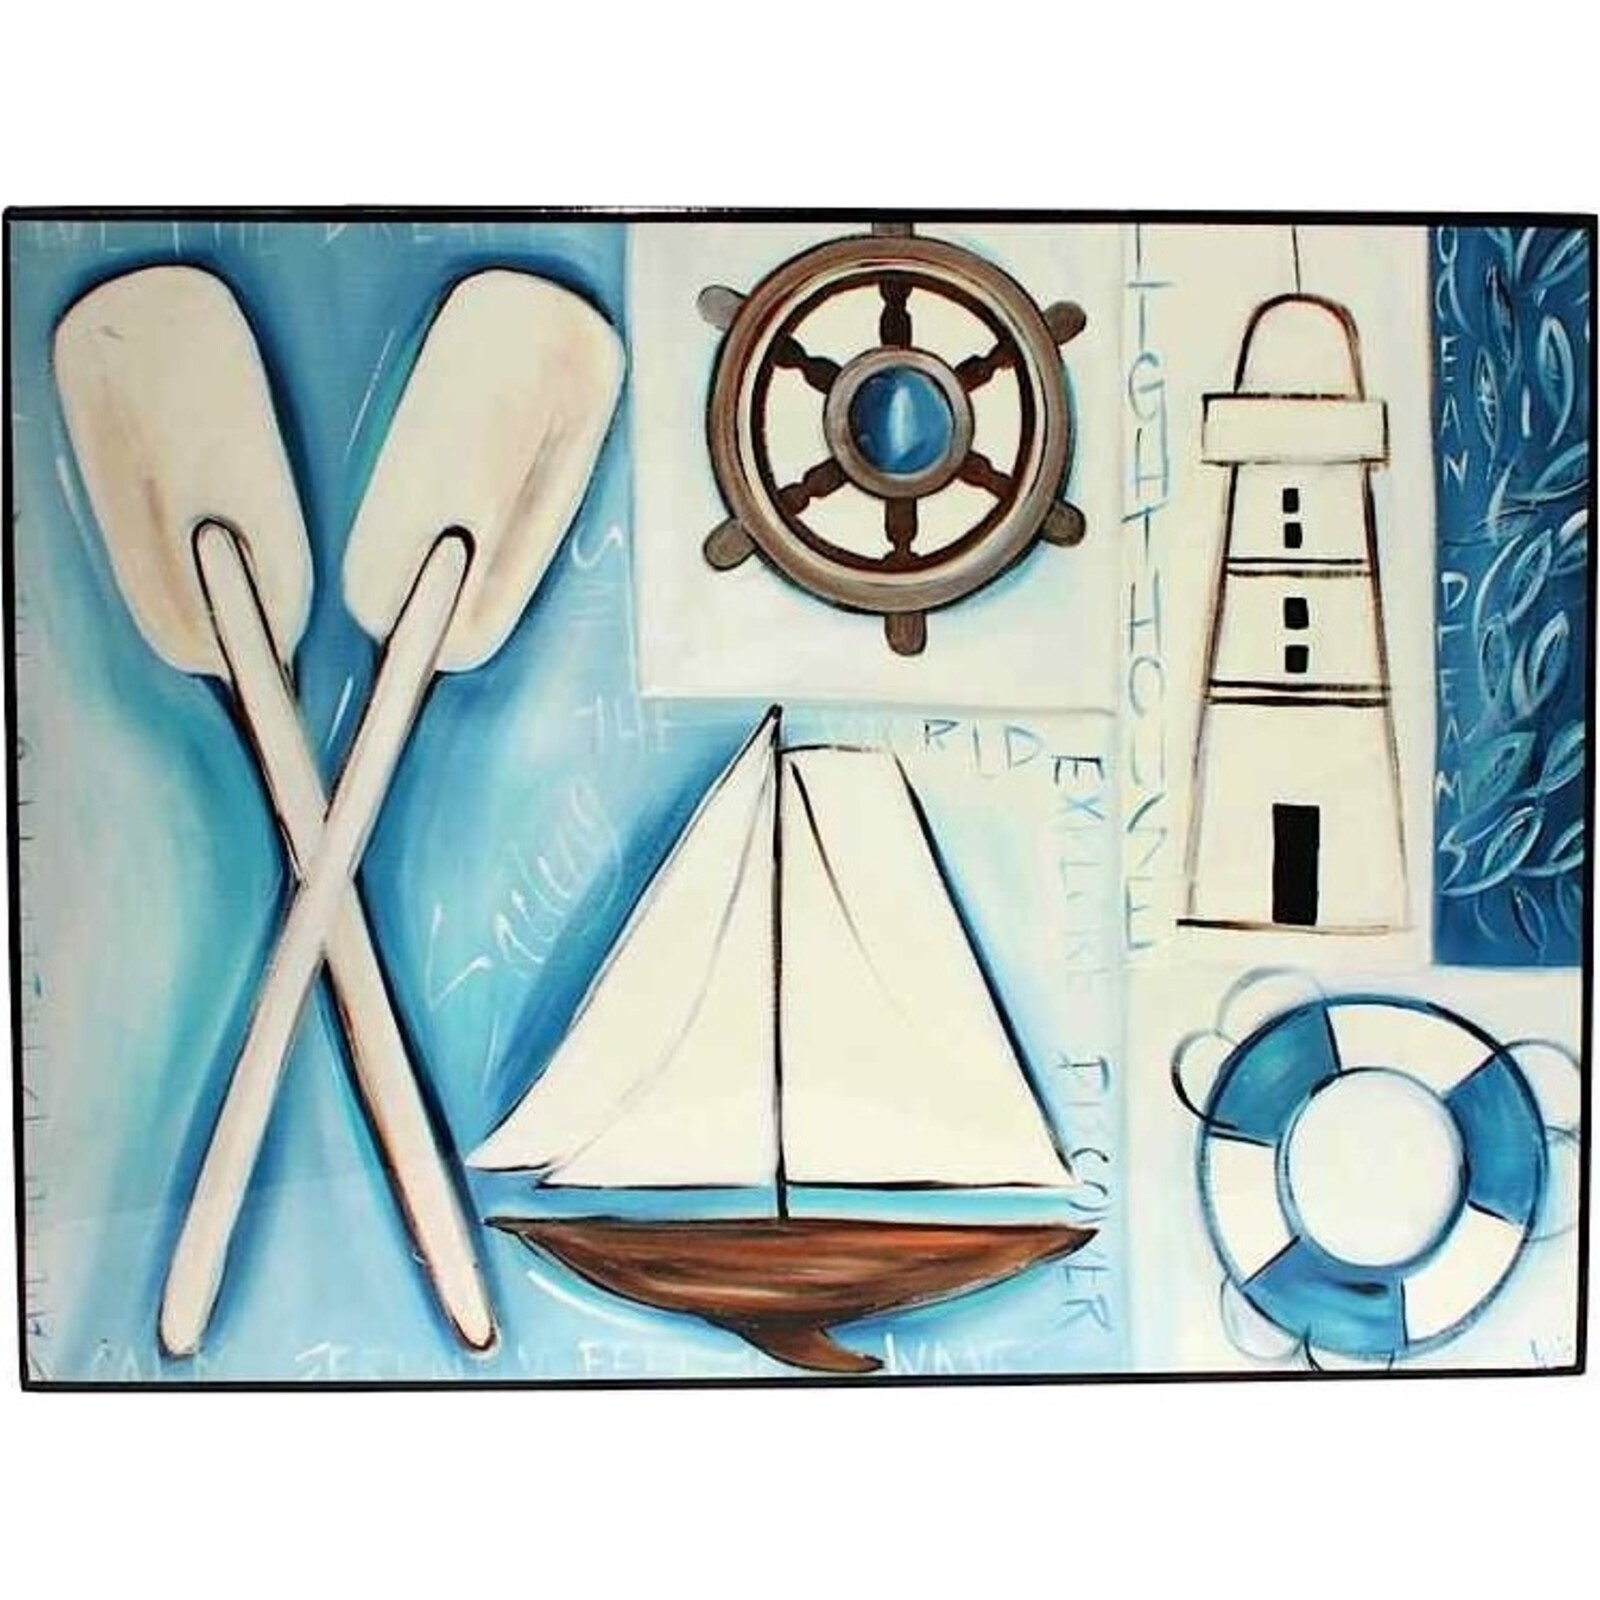 Lacquer Artwork - Oars Combo - Large 